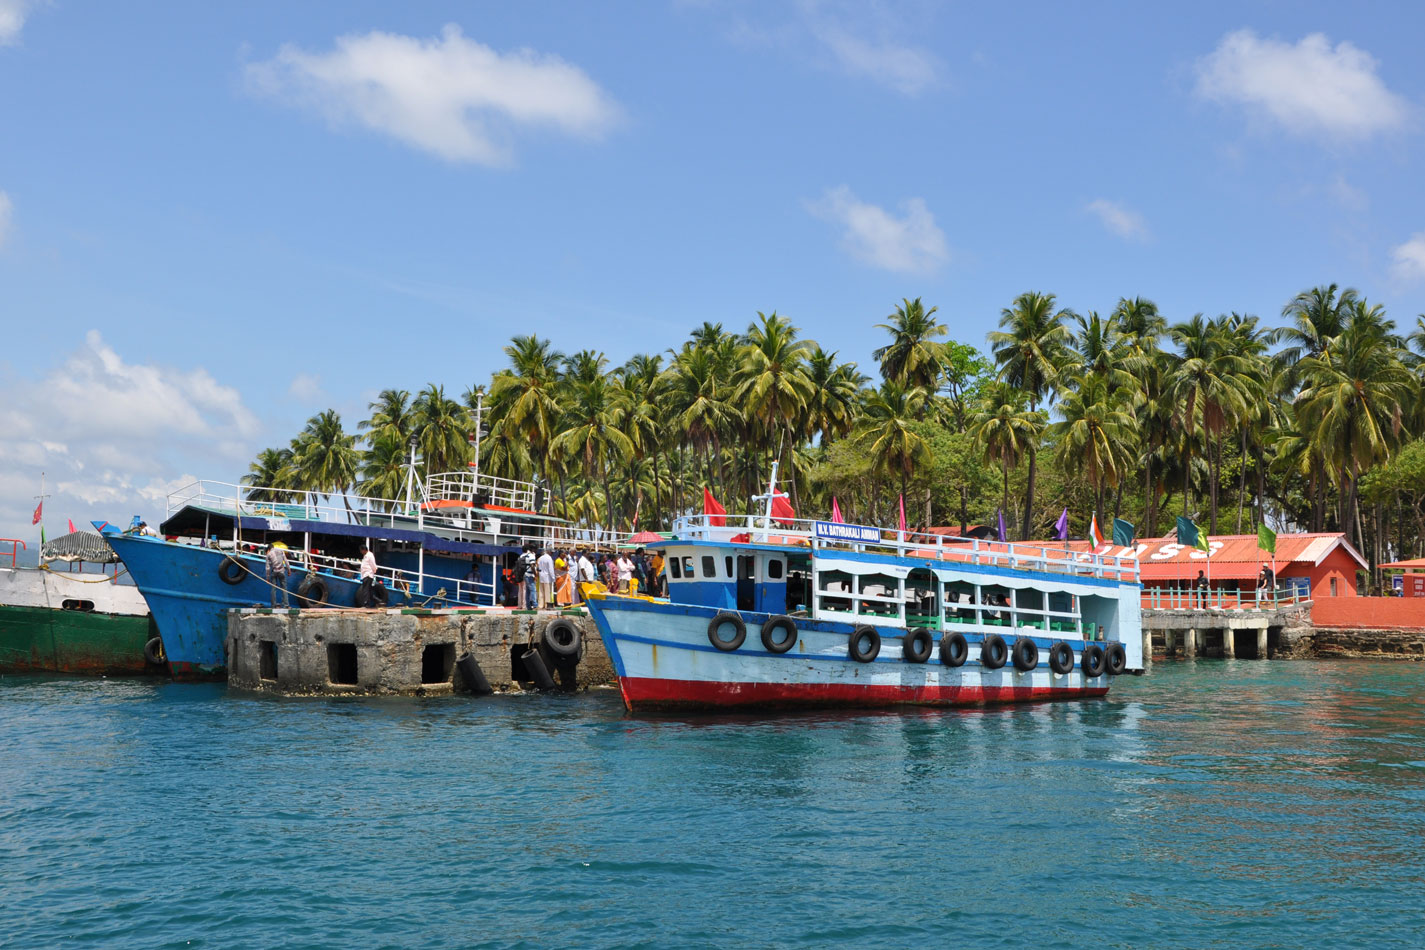 andaman tour package from chennai by ship